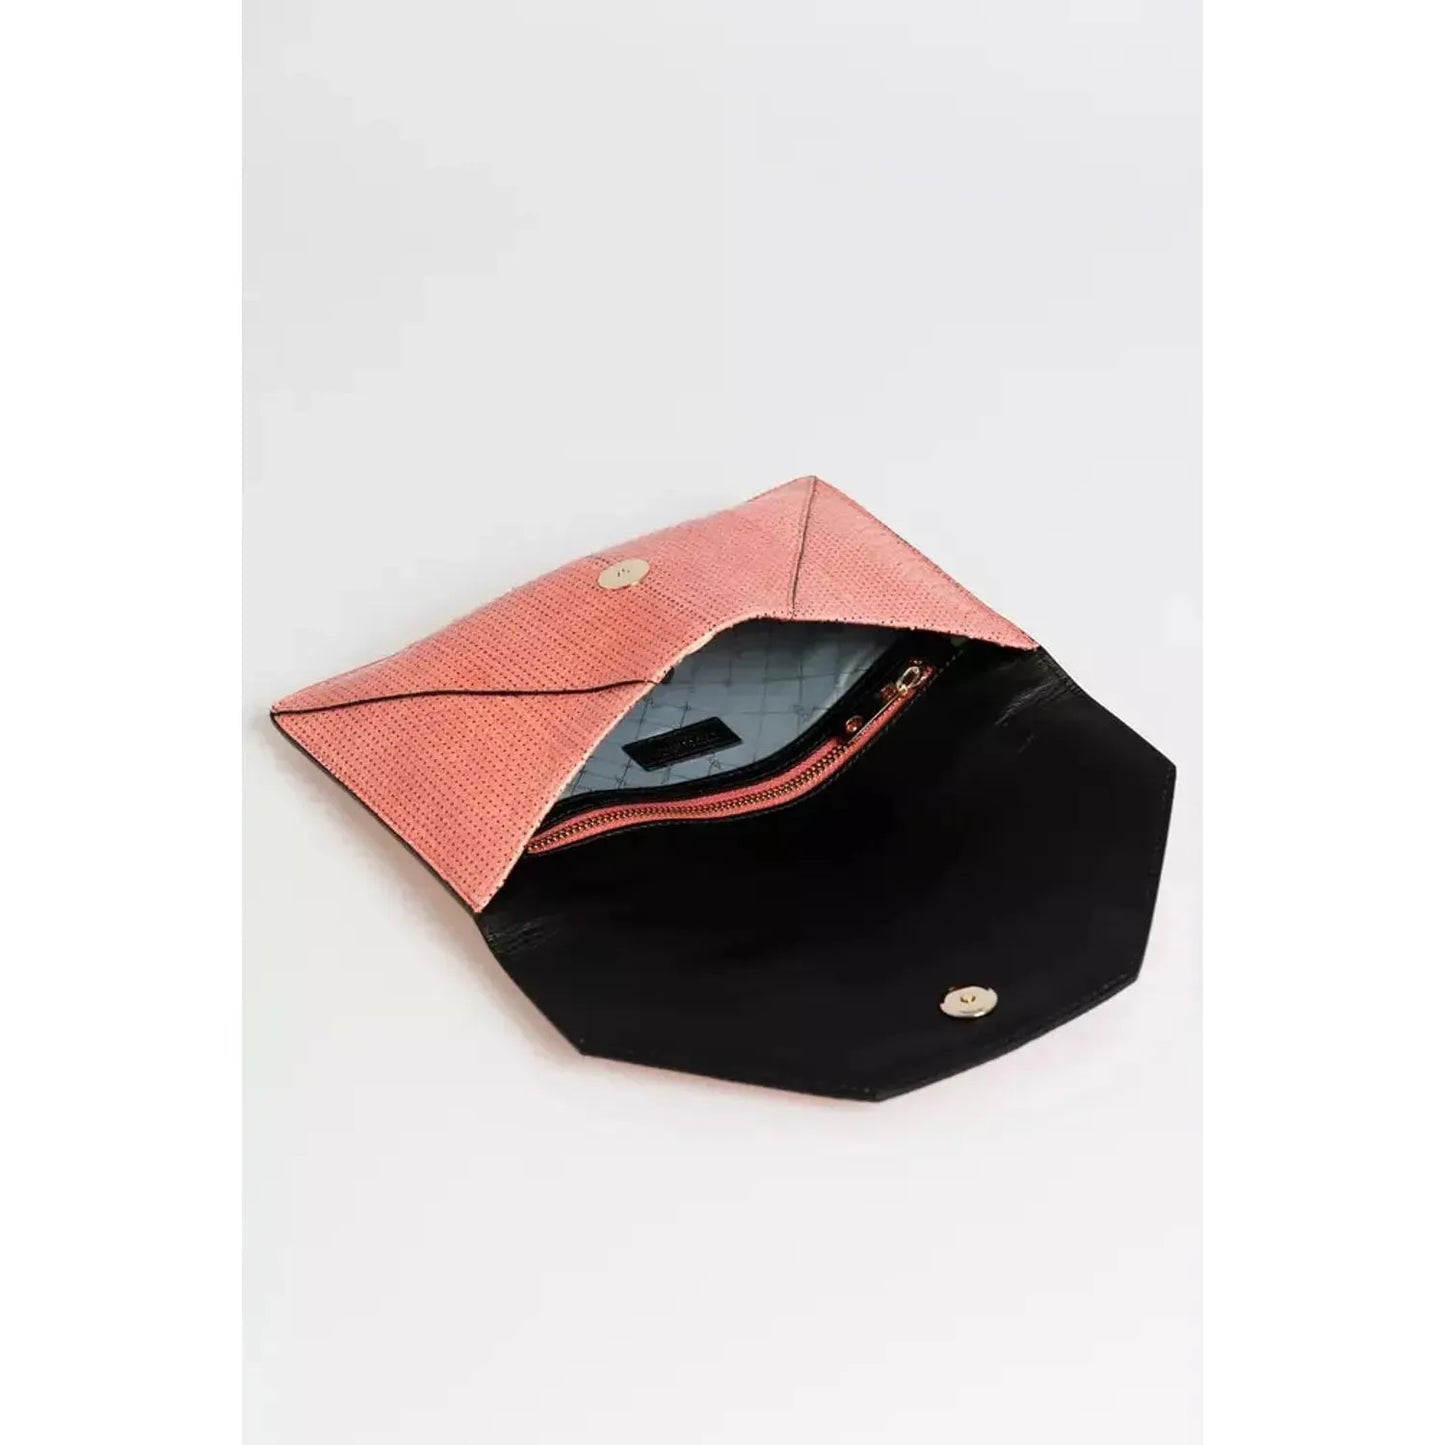 Trussardi Elegant Perforated Leather Envelope Clutch WOMAN CLUTCH pink-leather-clutch-bag stock_product_image_21570_5664442-22-a8f26ed6-75d.webp